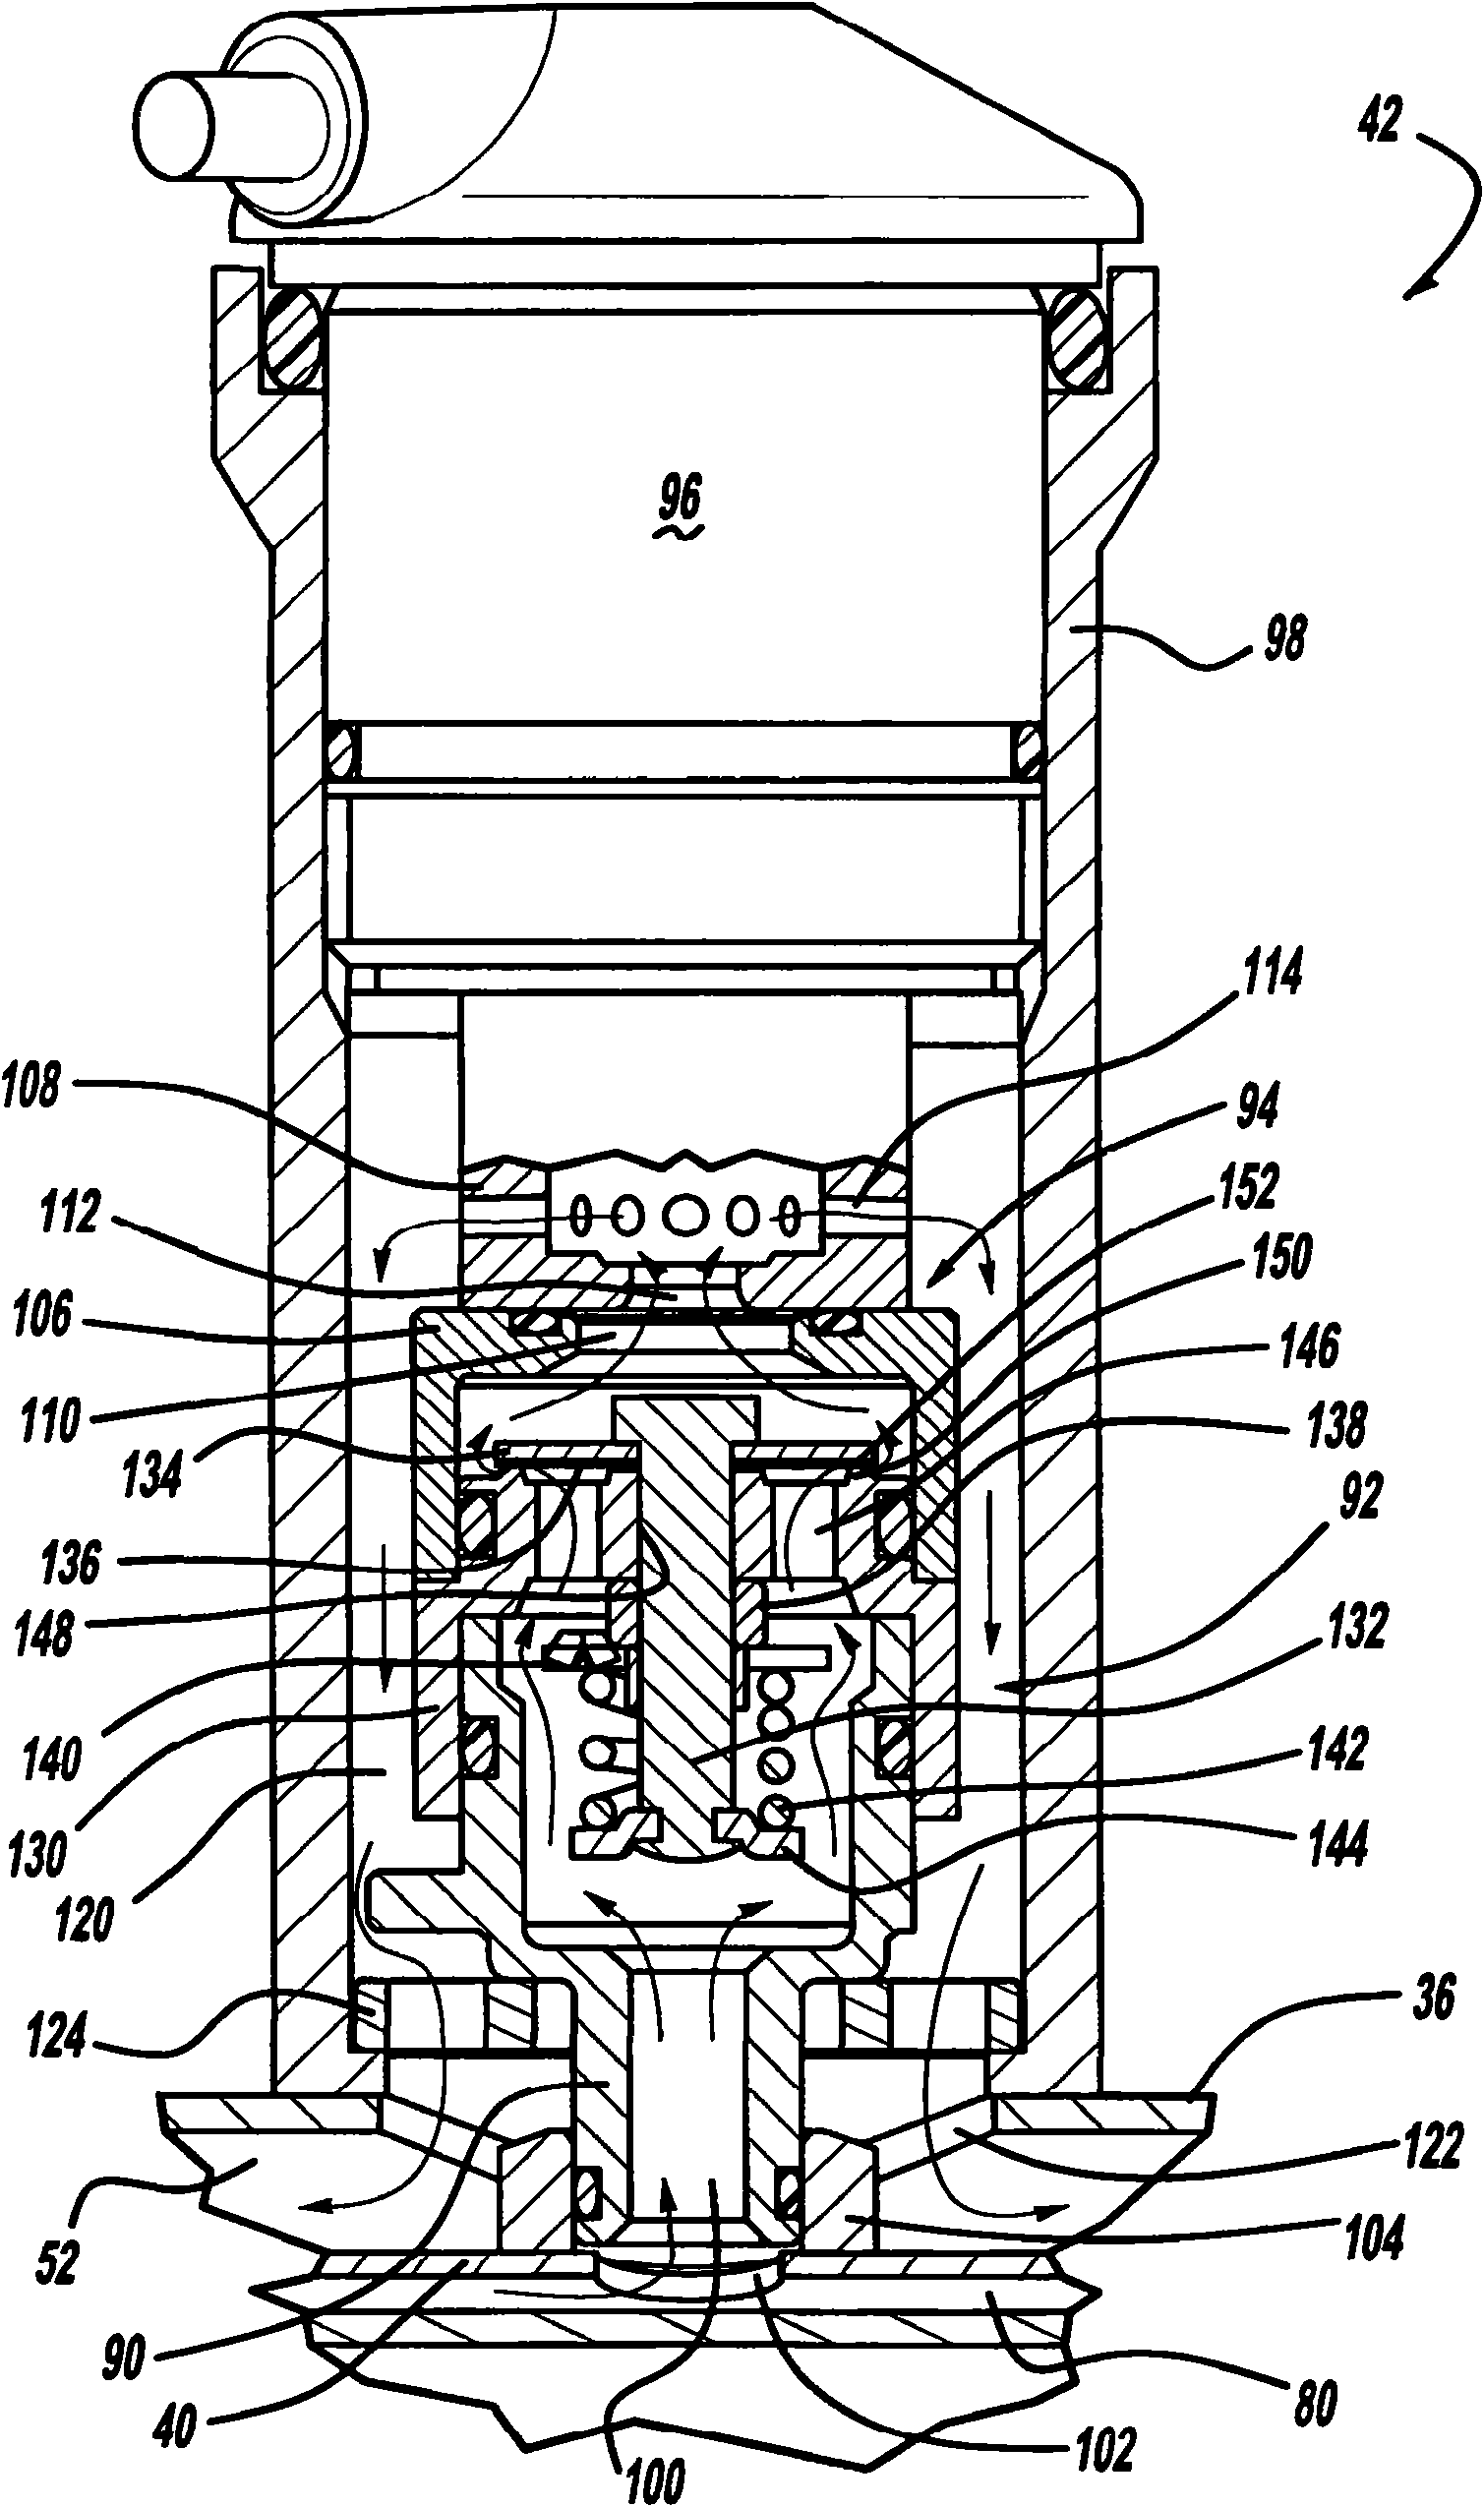 Shock absorber having a continuously variable valve with base line valving